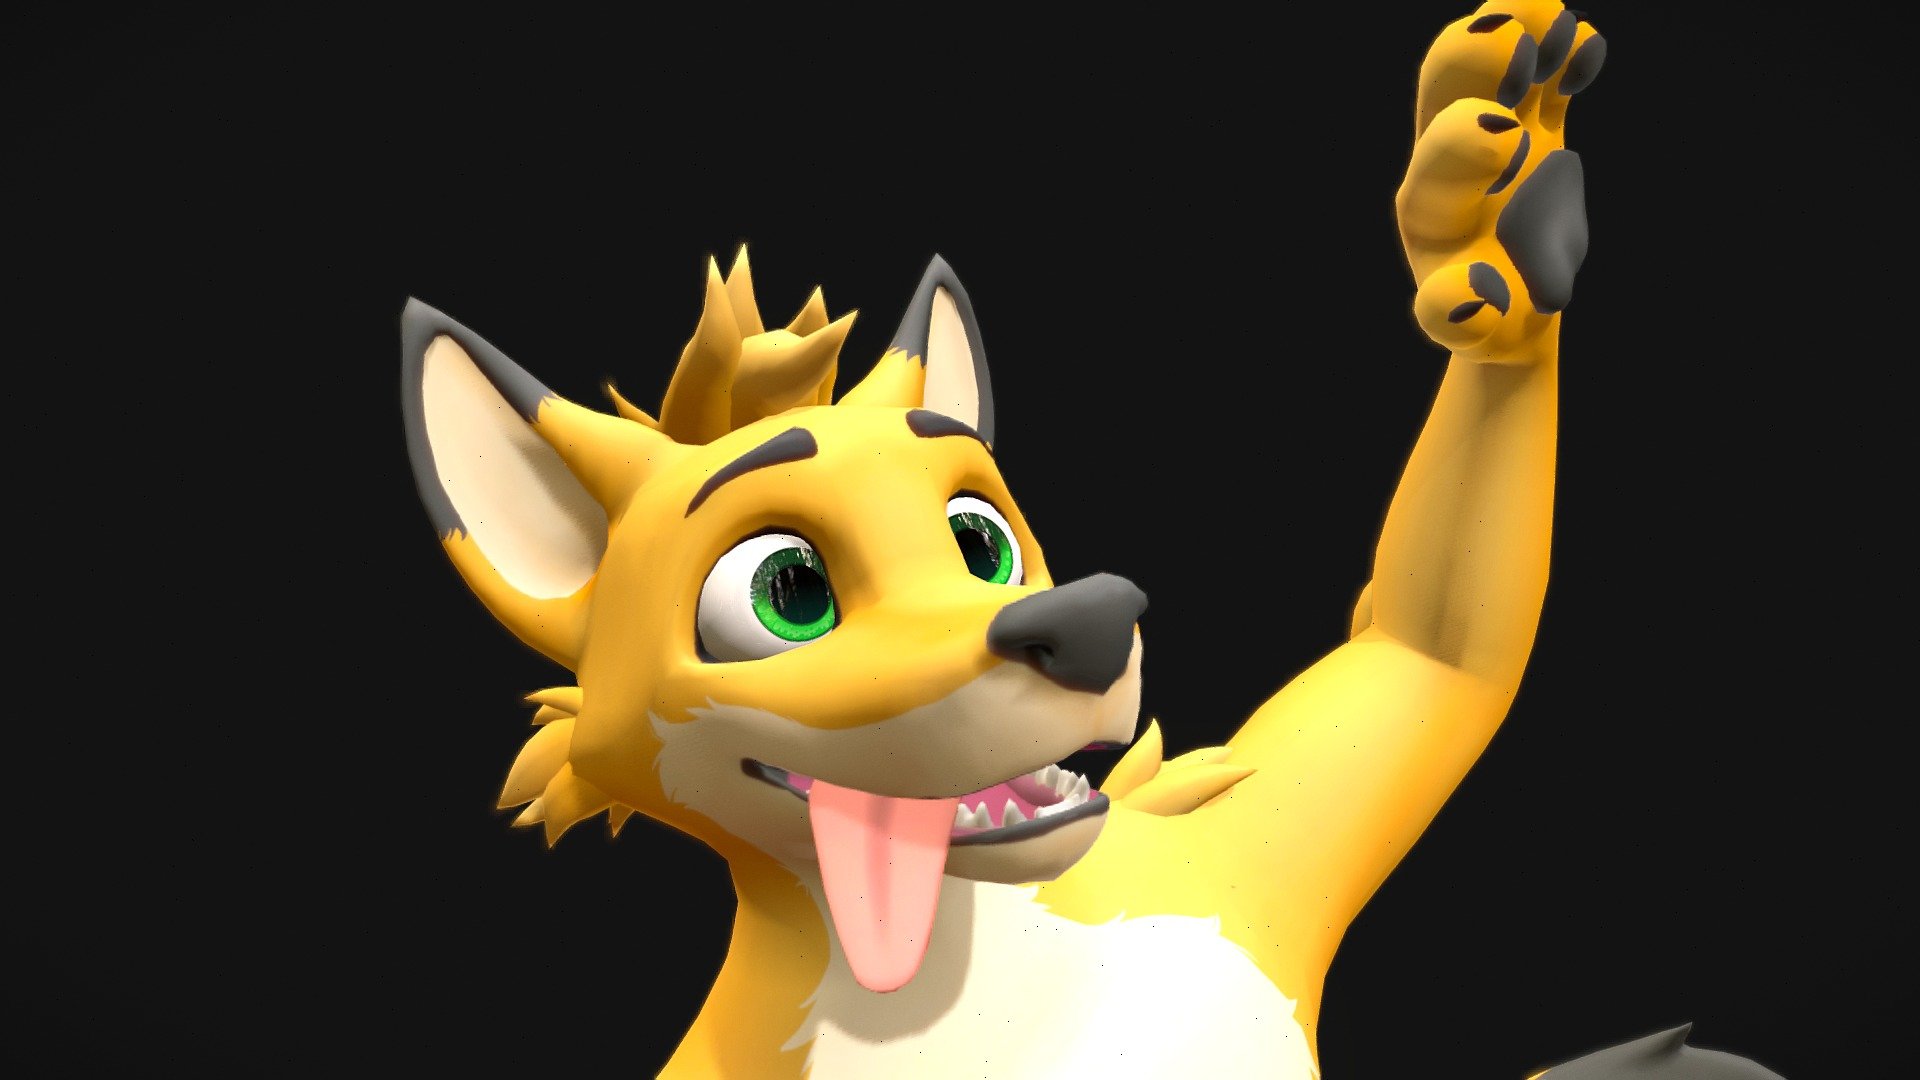 Custom VRChat avatar of Lance the Fox for LanceOakesFox! Features visemes, 8 expressions, and numerous clothing

Box modeled in Blender, textured in Adobe Substance Painter

This is a custom commission and is not downloadable publicly 3d model